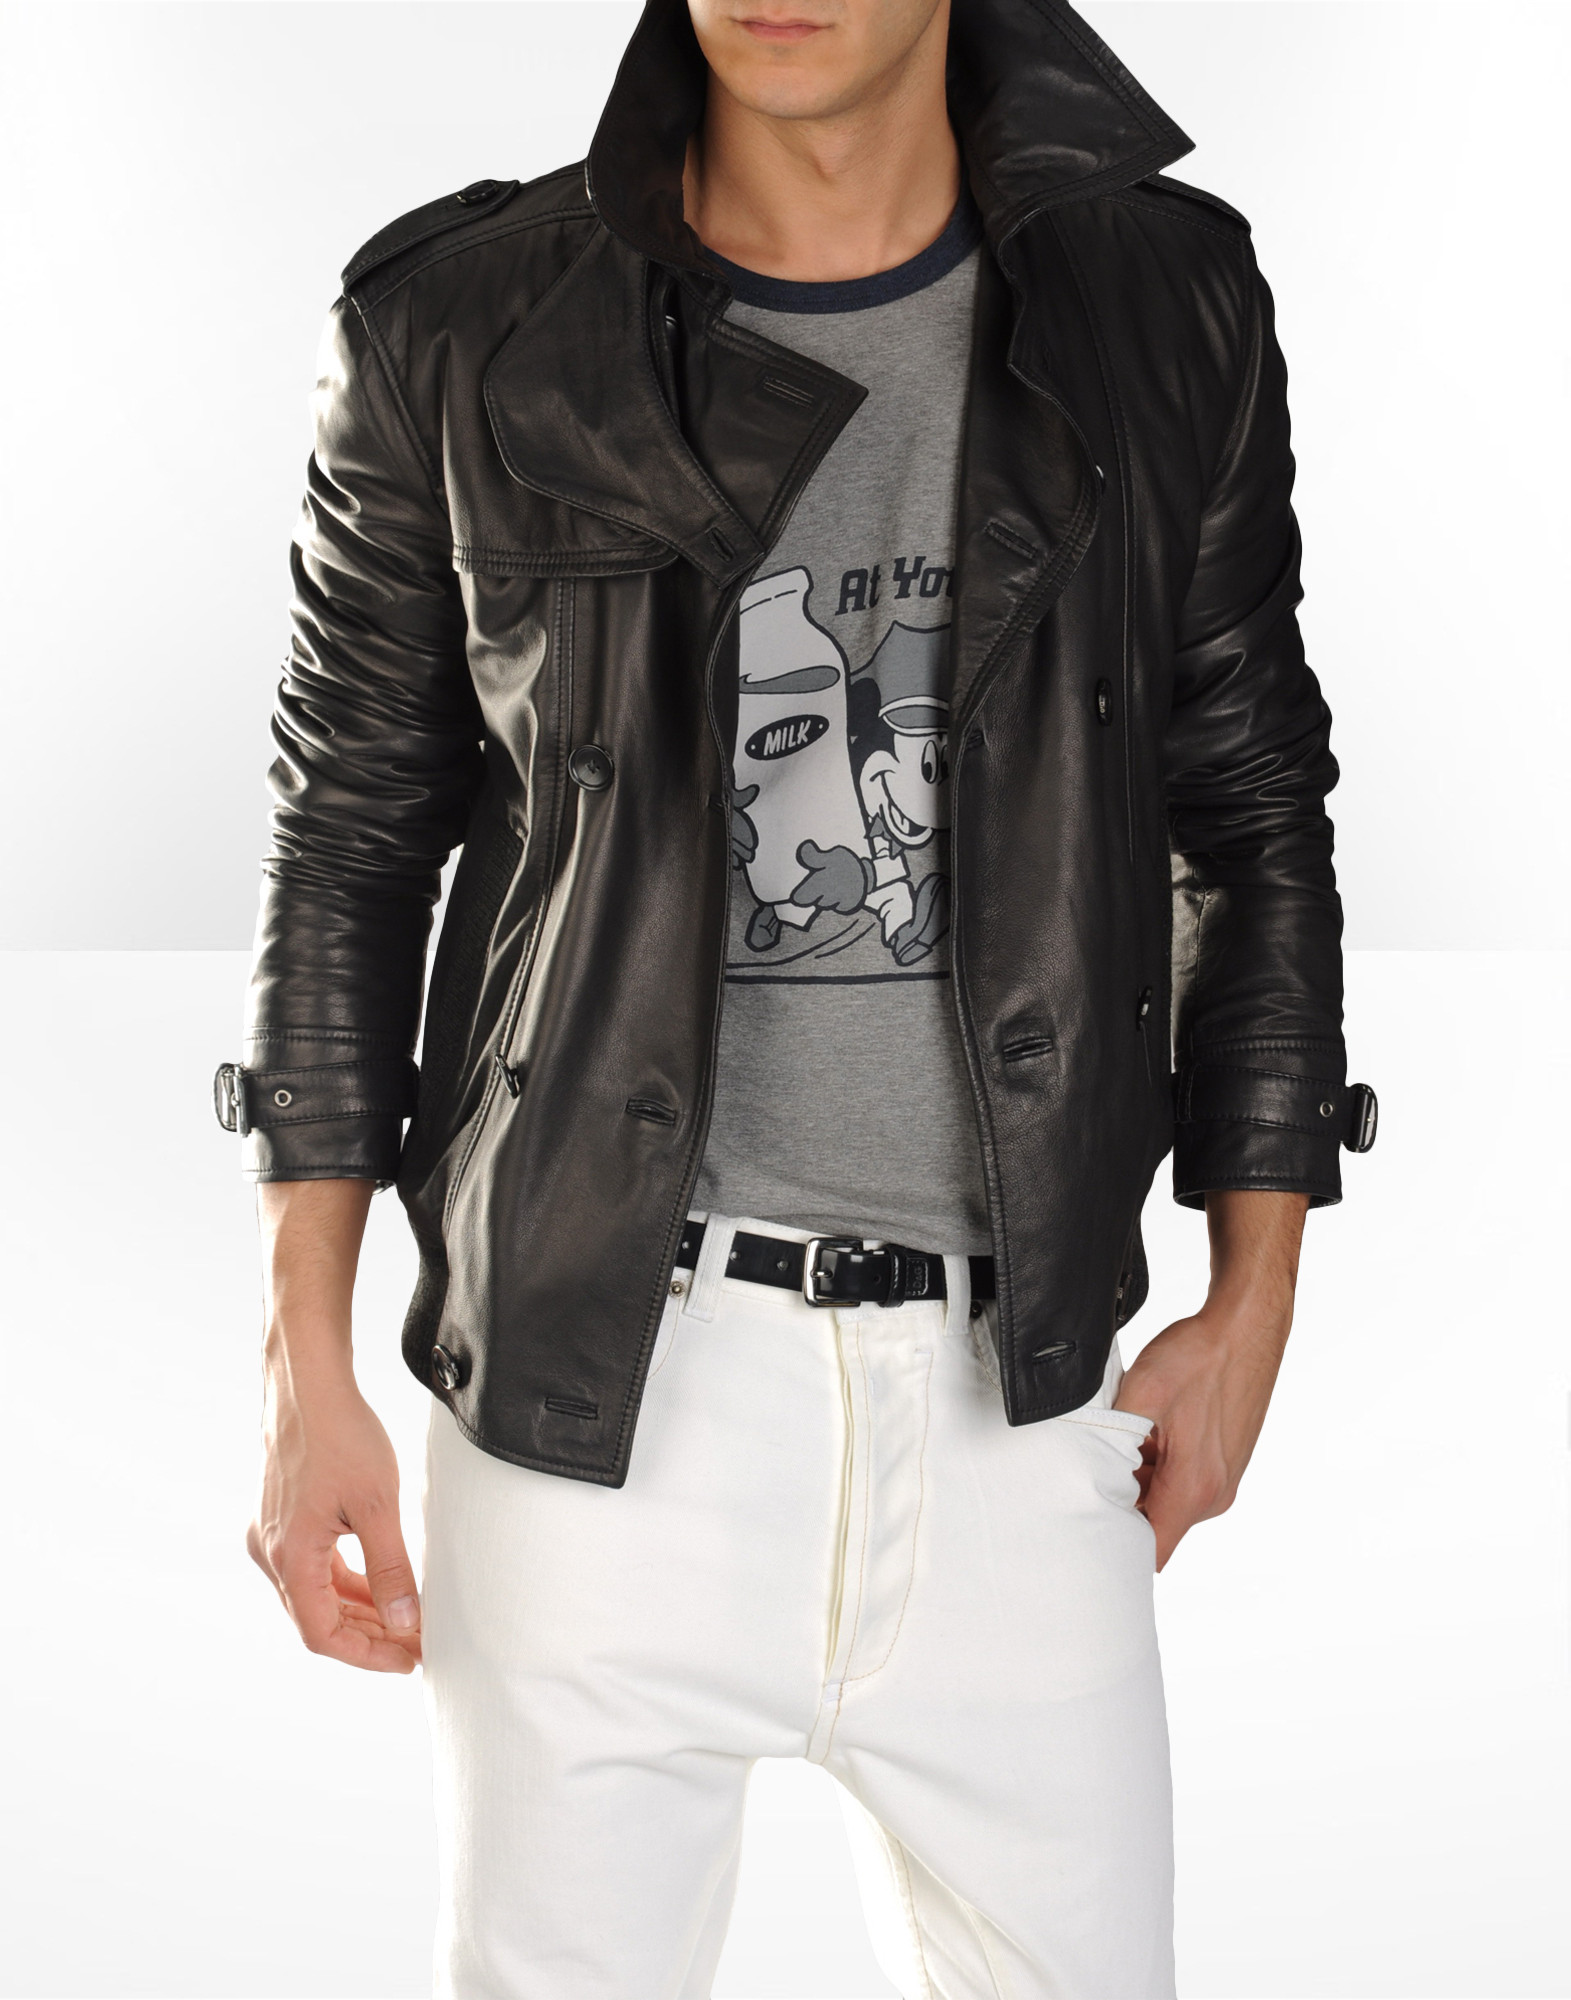 d and g leather jackets mens